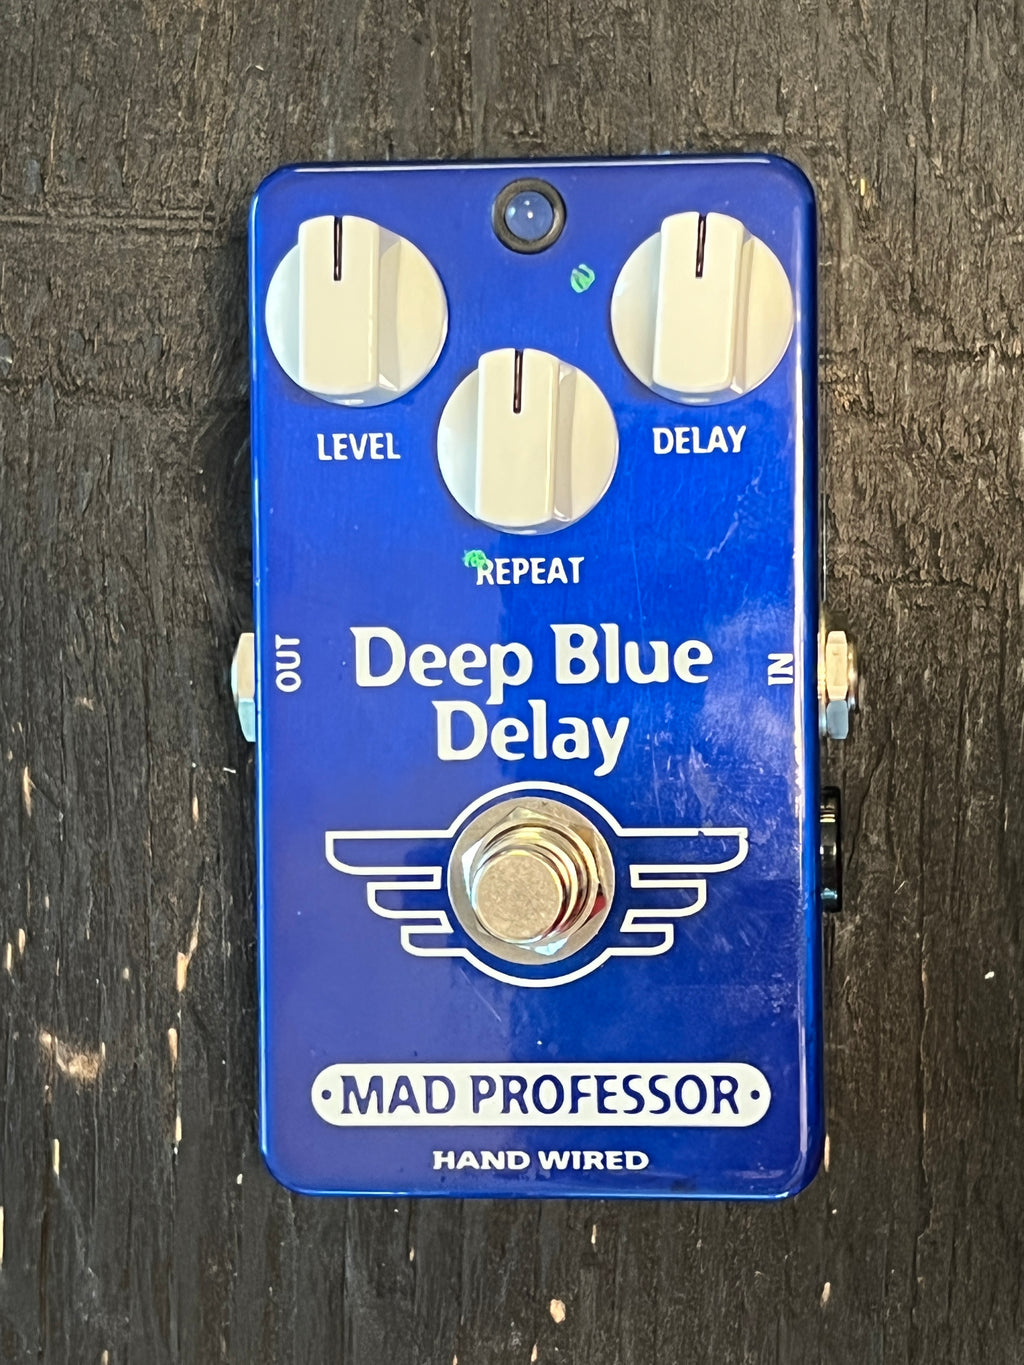 SOLD - Mad Professor Deep Blue Delay Hand Wired – Mahar's Vintage